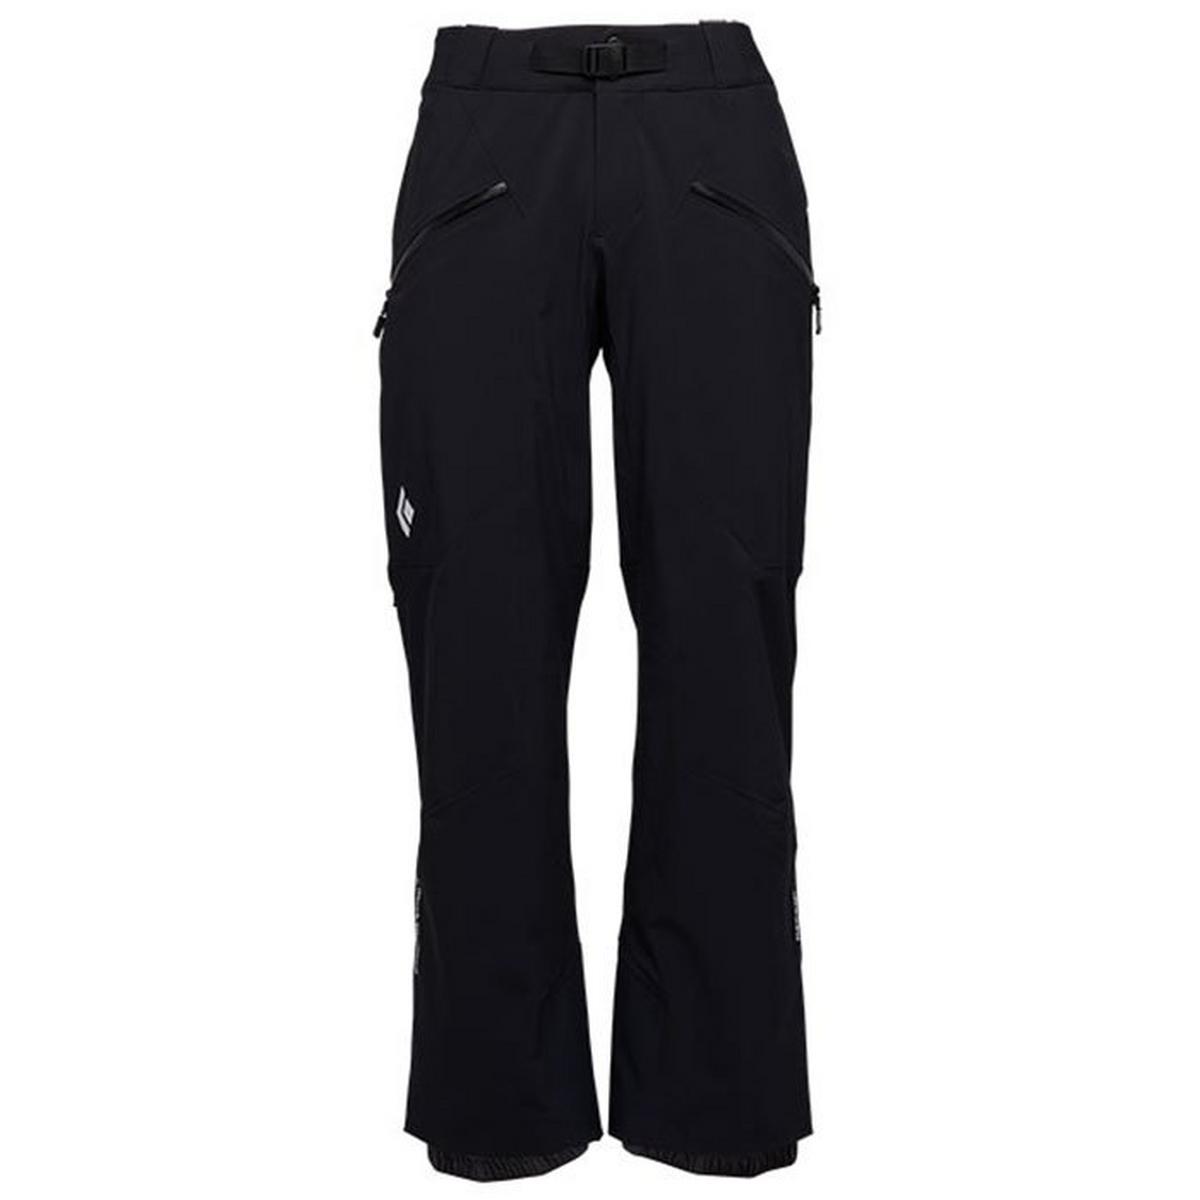 Men's Recon Stretch Insulated Pant